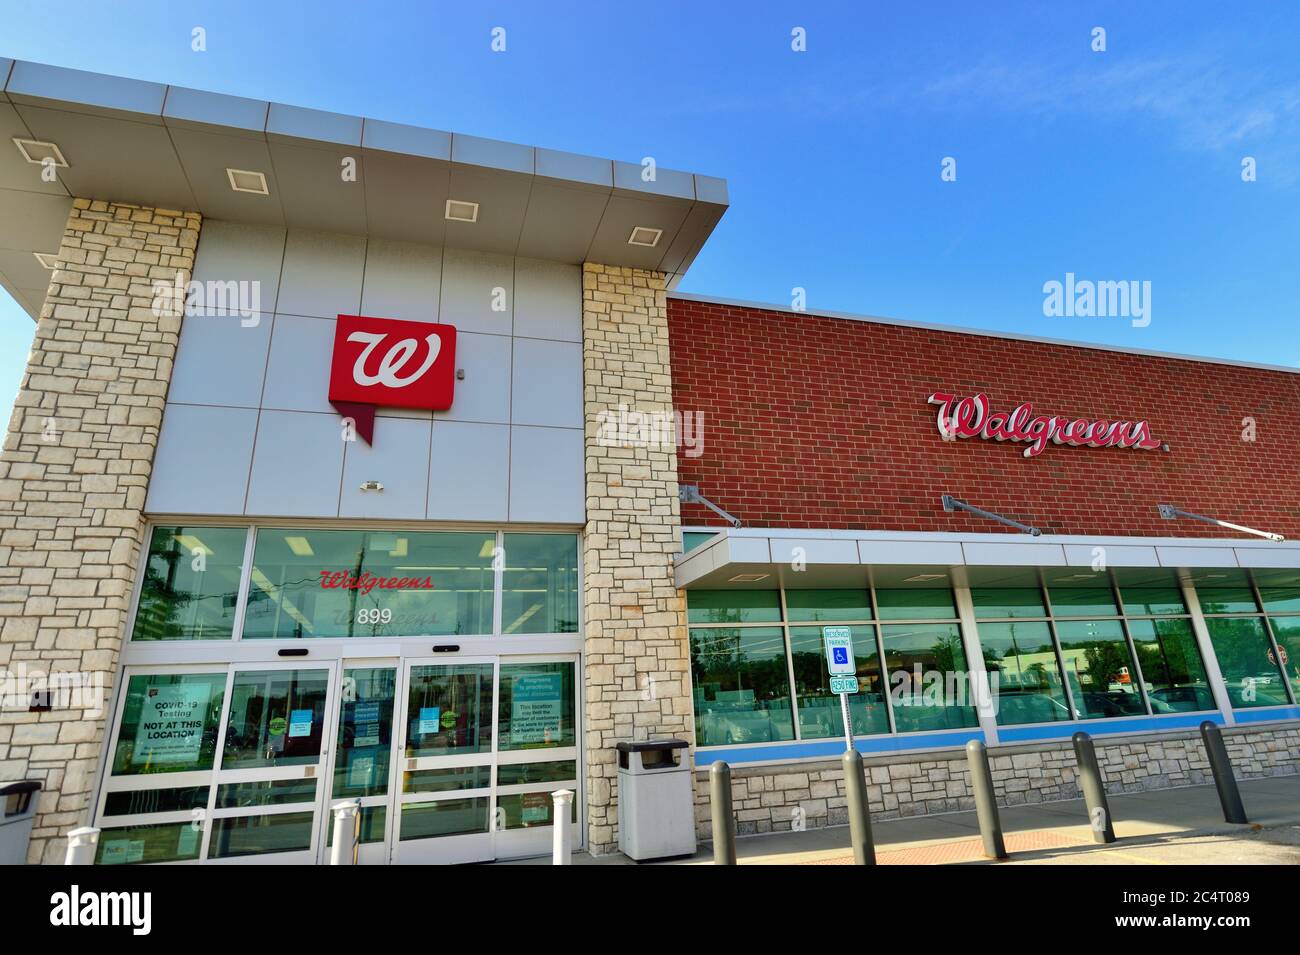 bartlett illinois usa a walgreens drug store in suburban chicago walgreens maintains in excess of 9000 store locations in the united states 2C4T089